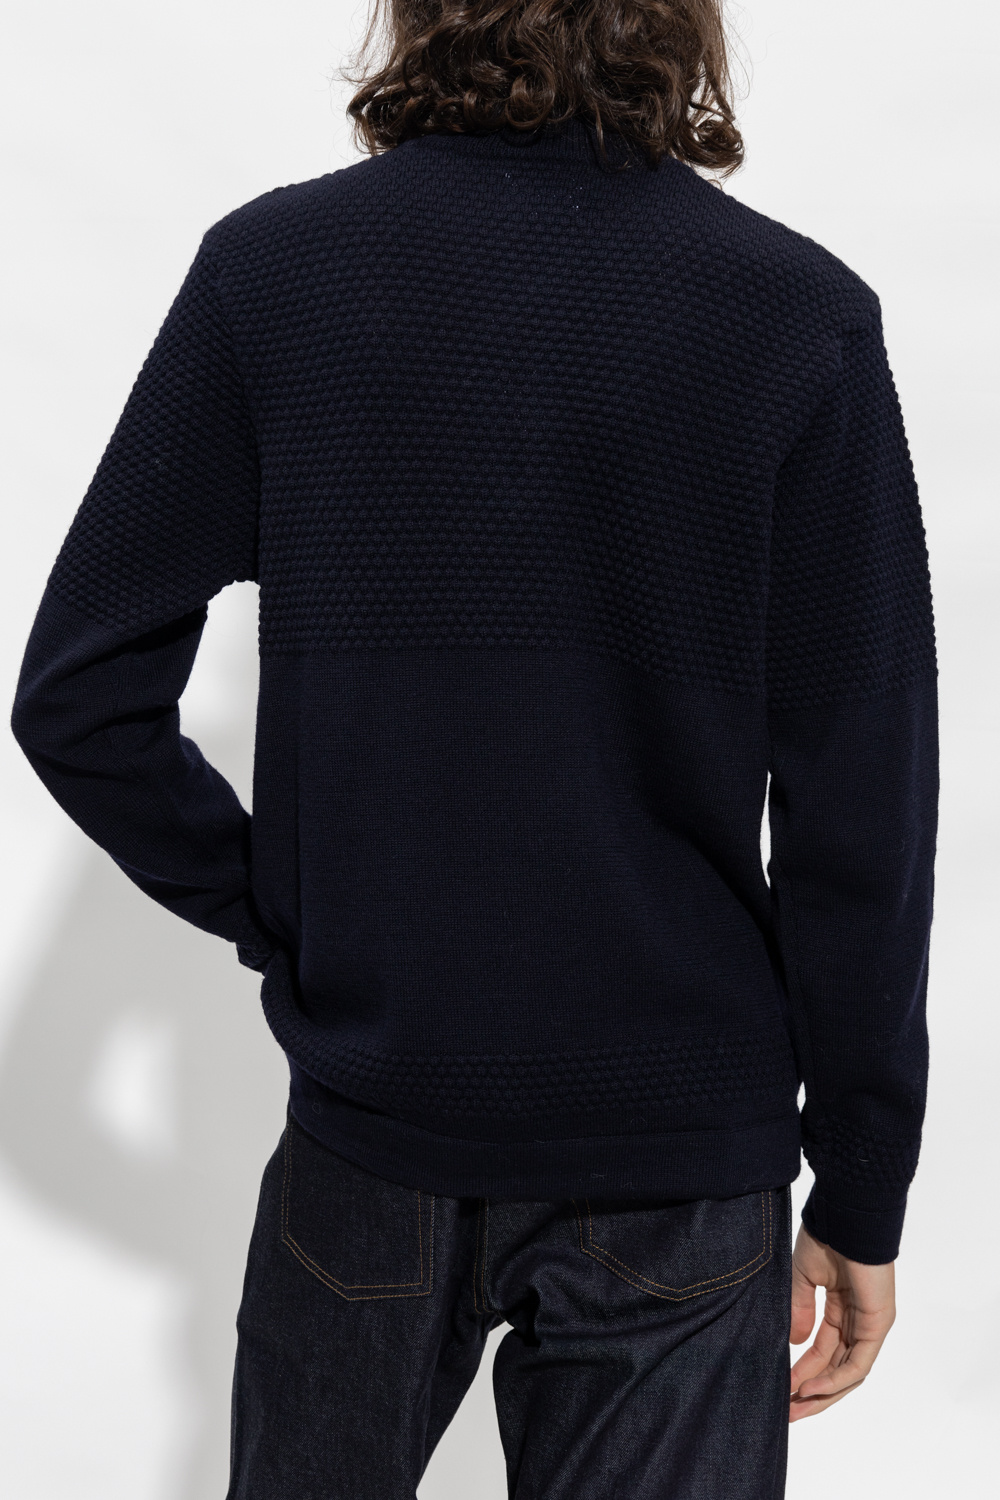 Norse Projects ‘Fjord’ Bobo sweater